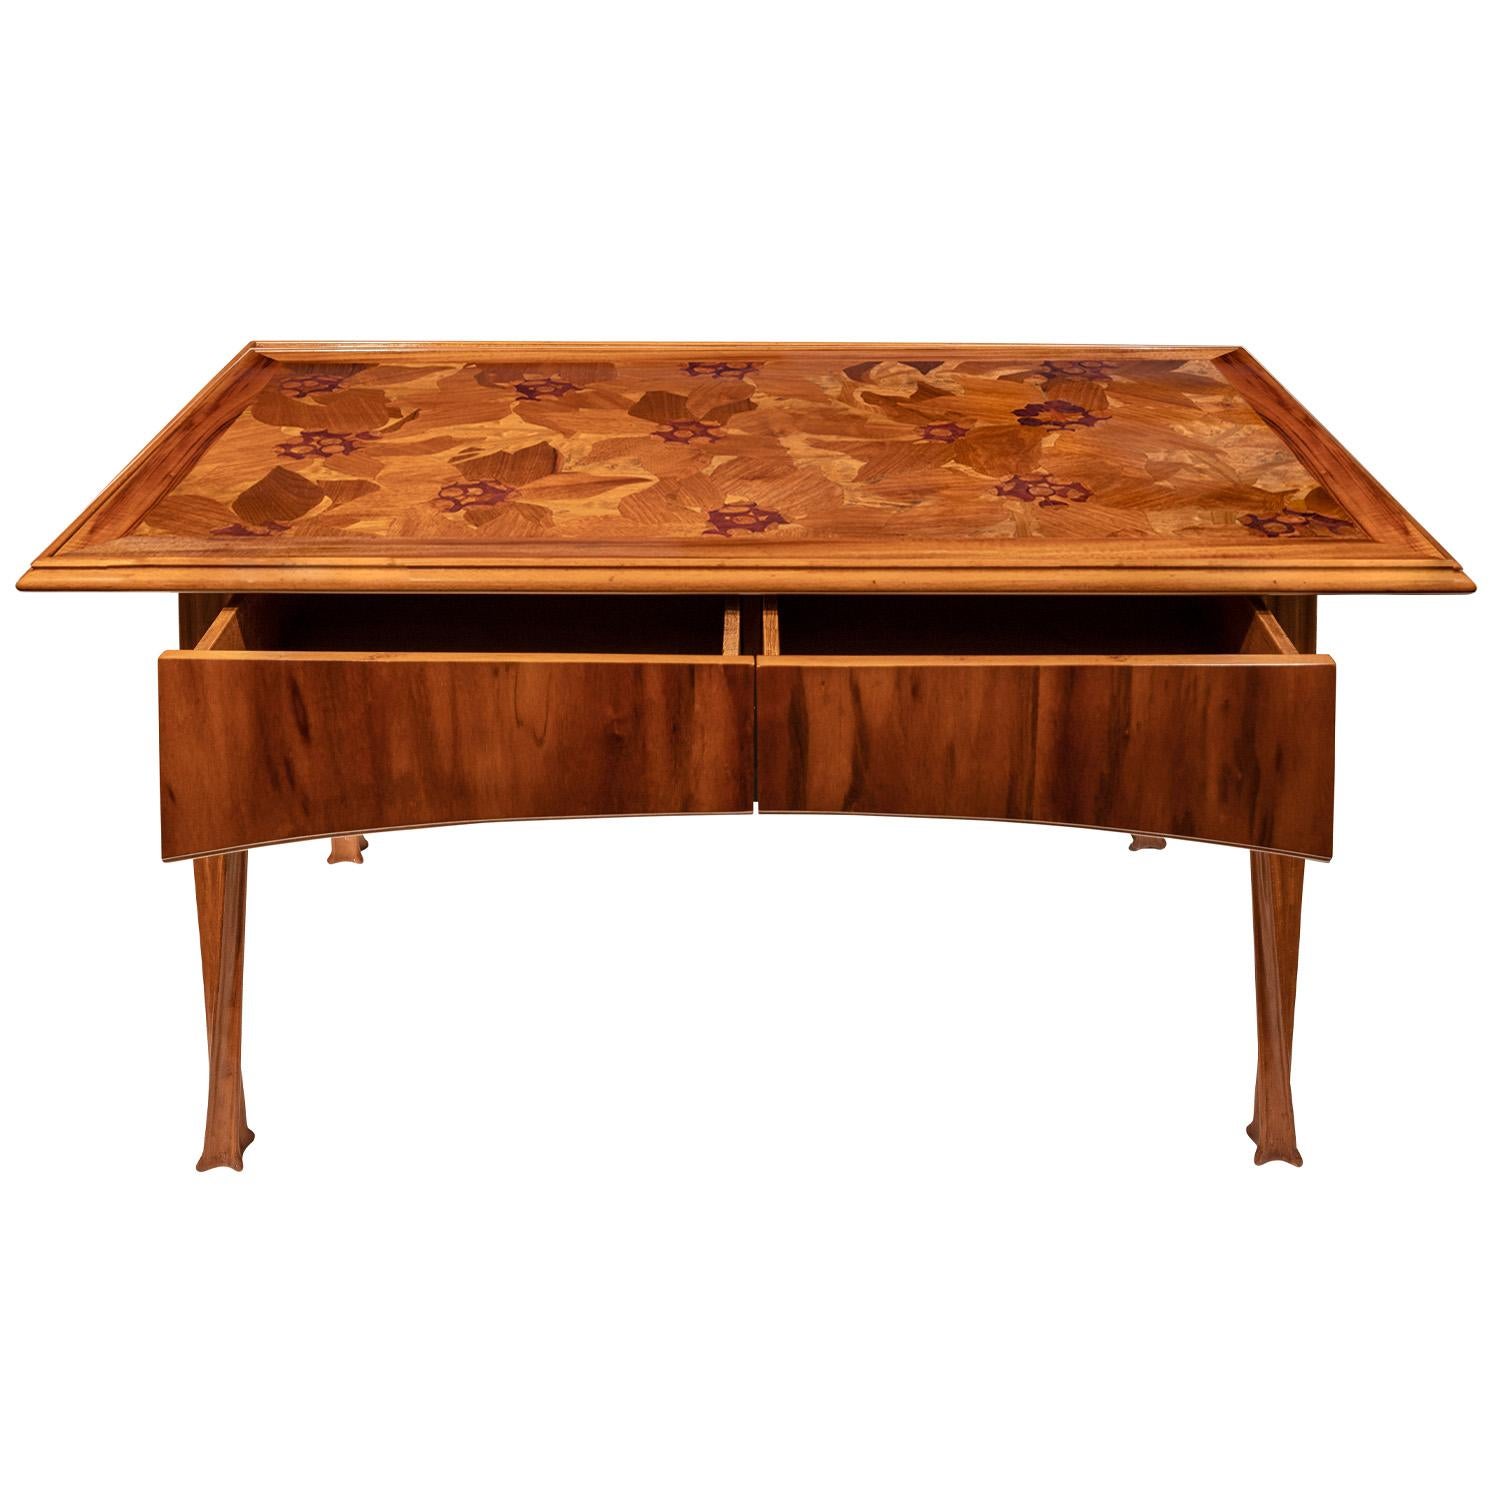 Hand-Crafted Louis Majorelle Rare Writing Desk with Botanical Inlays ca. 1900 (Signed) For Sale